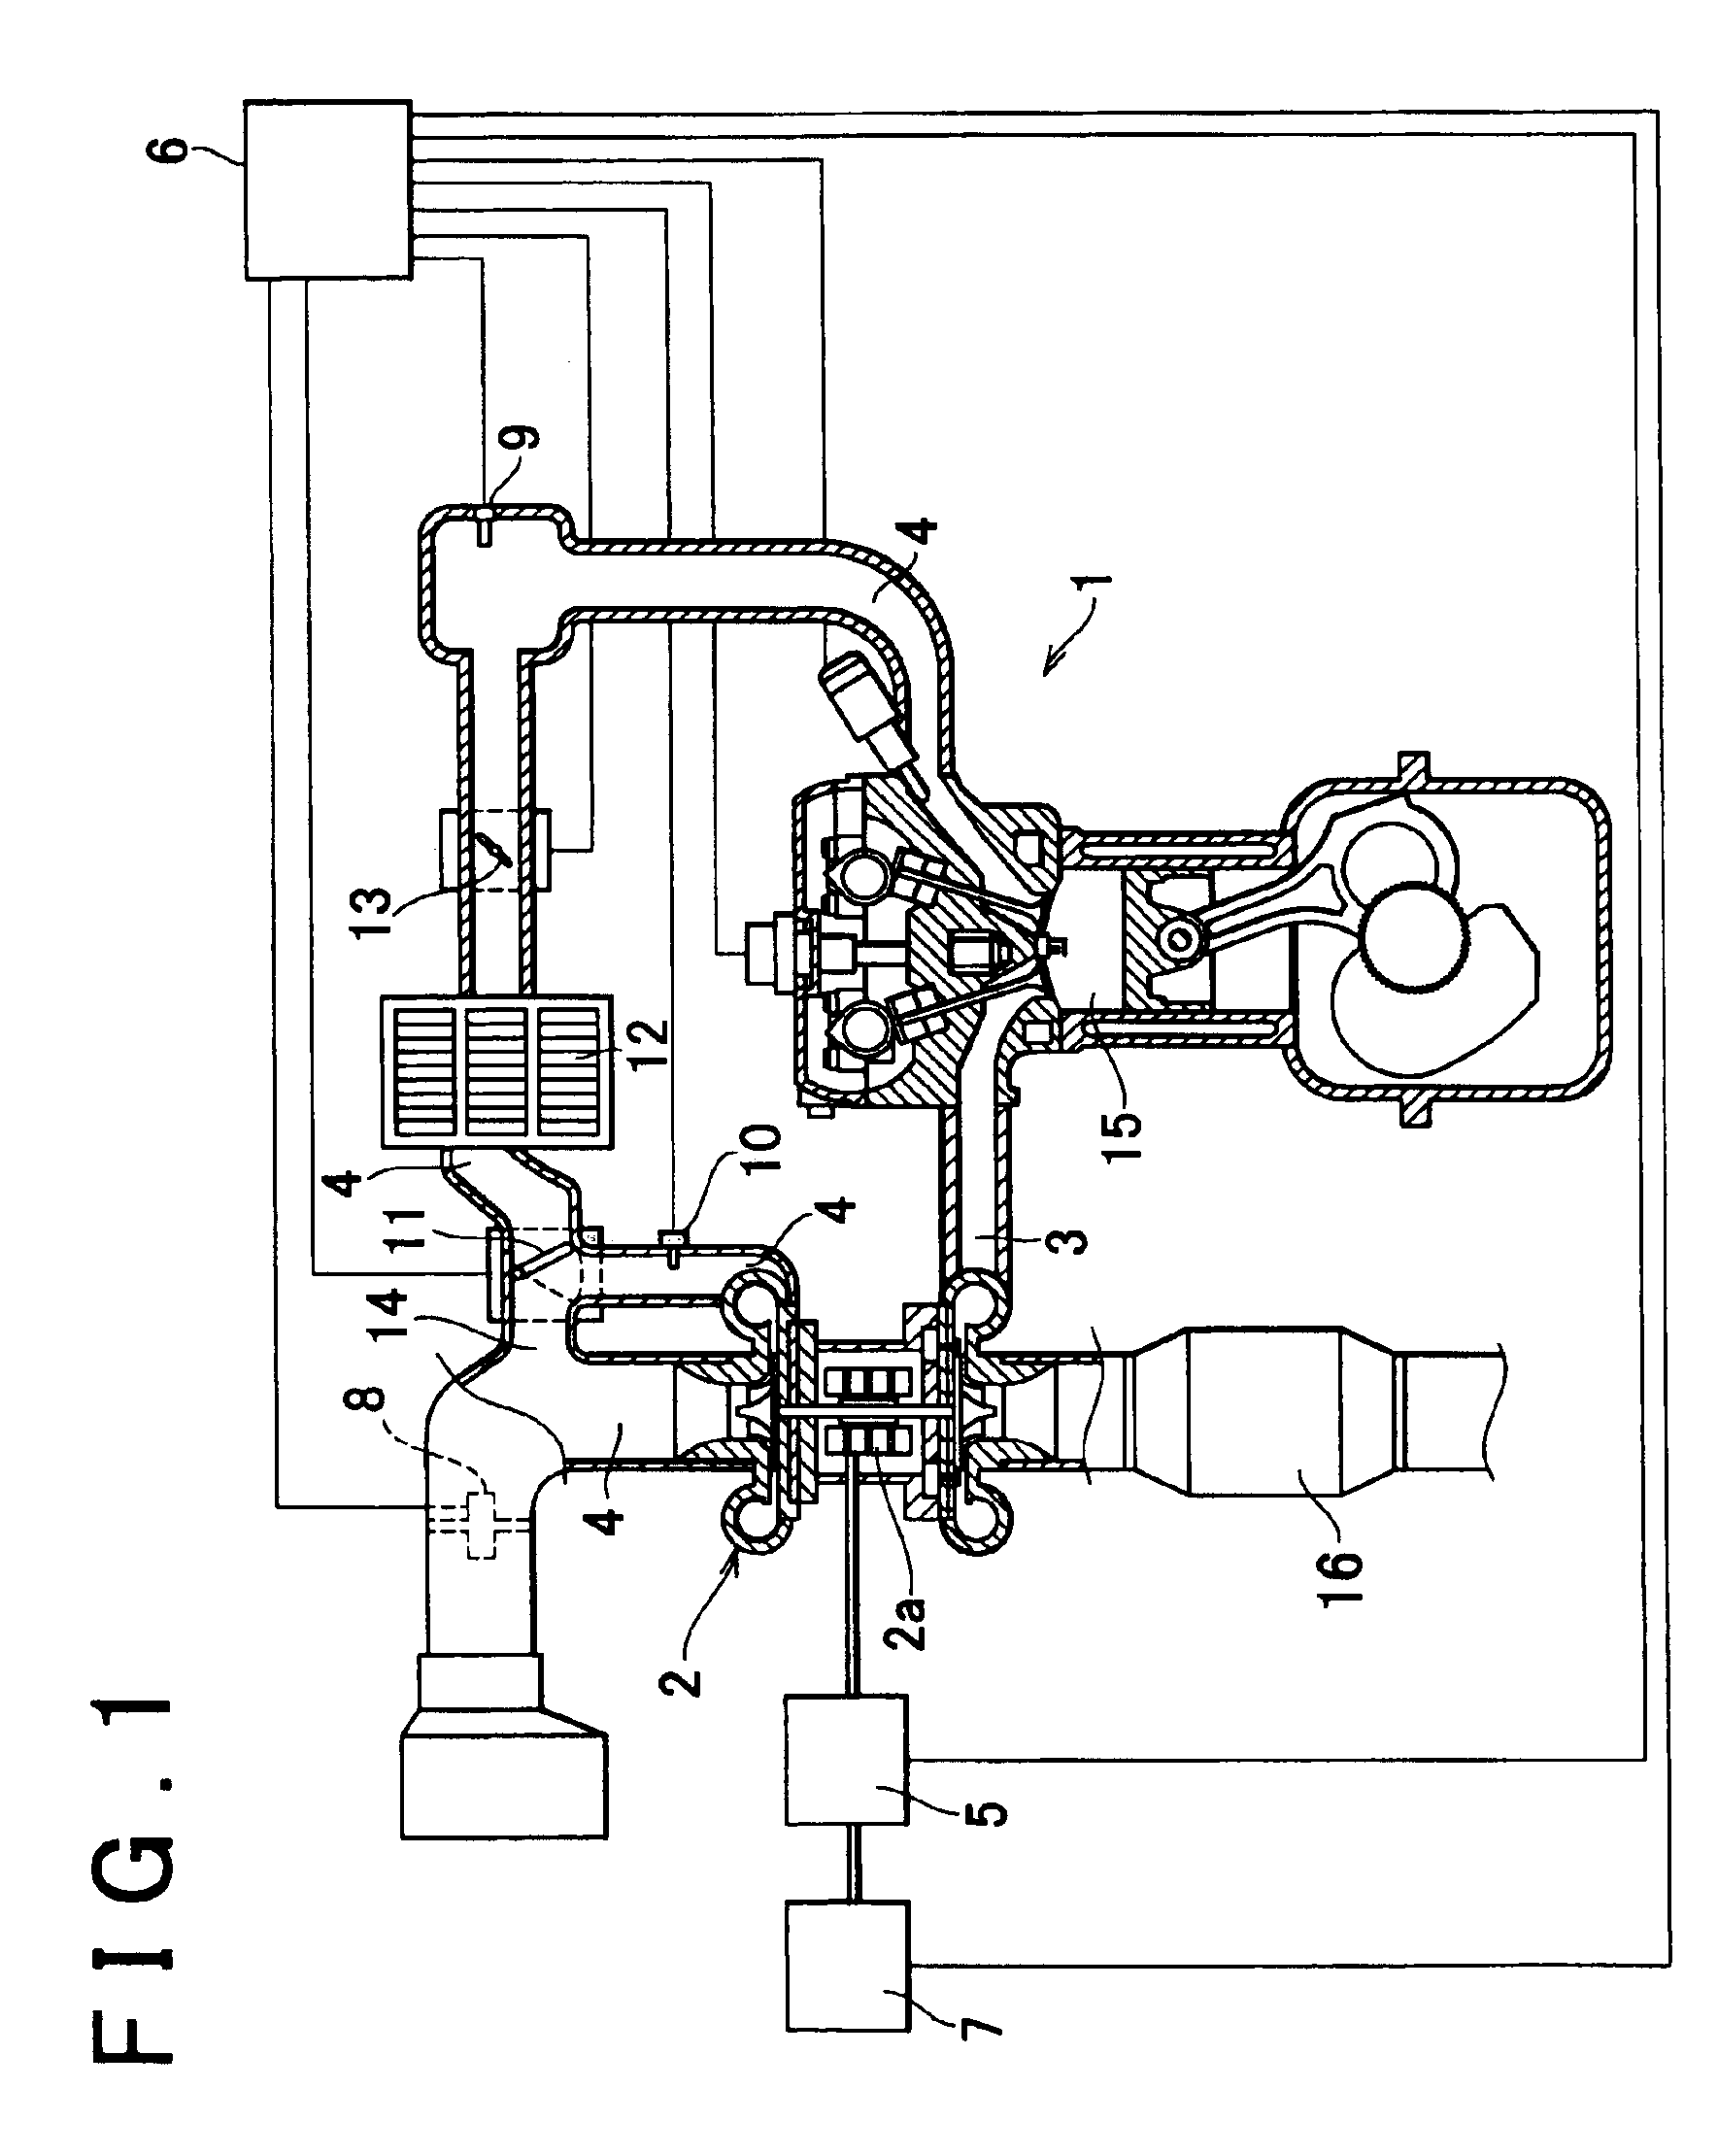 Control apparatus for internal combustion engine having motor-driven supercharger